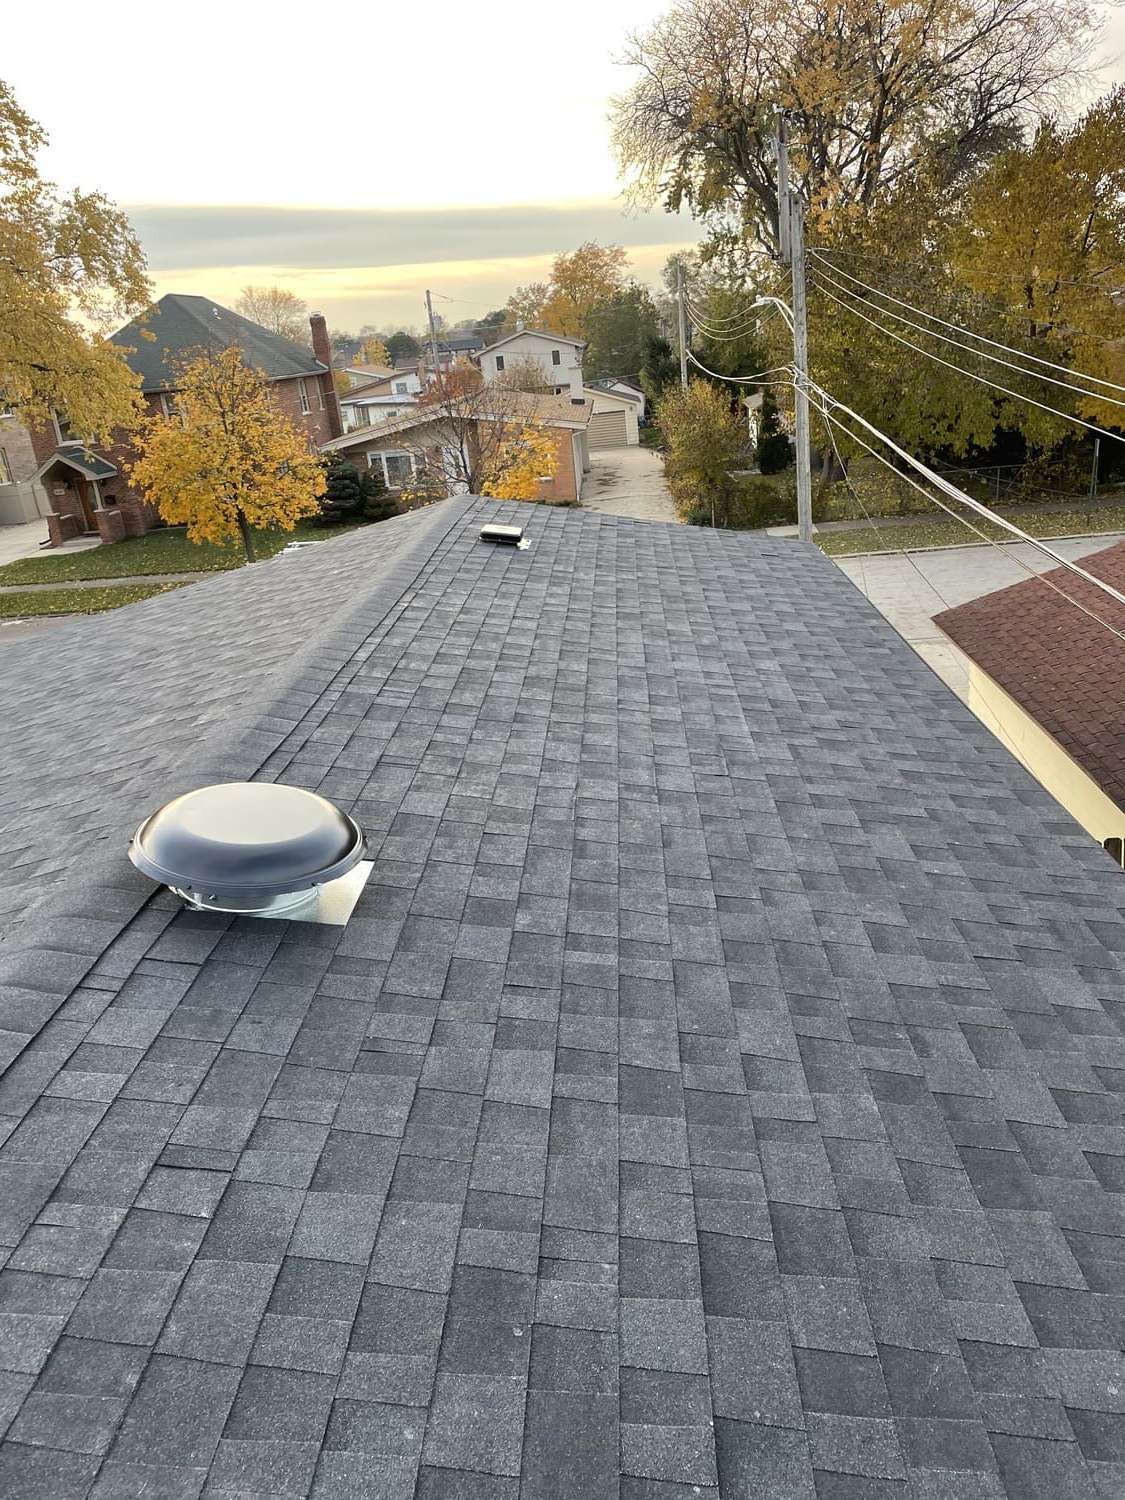 Top Team Roofing Services 10